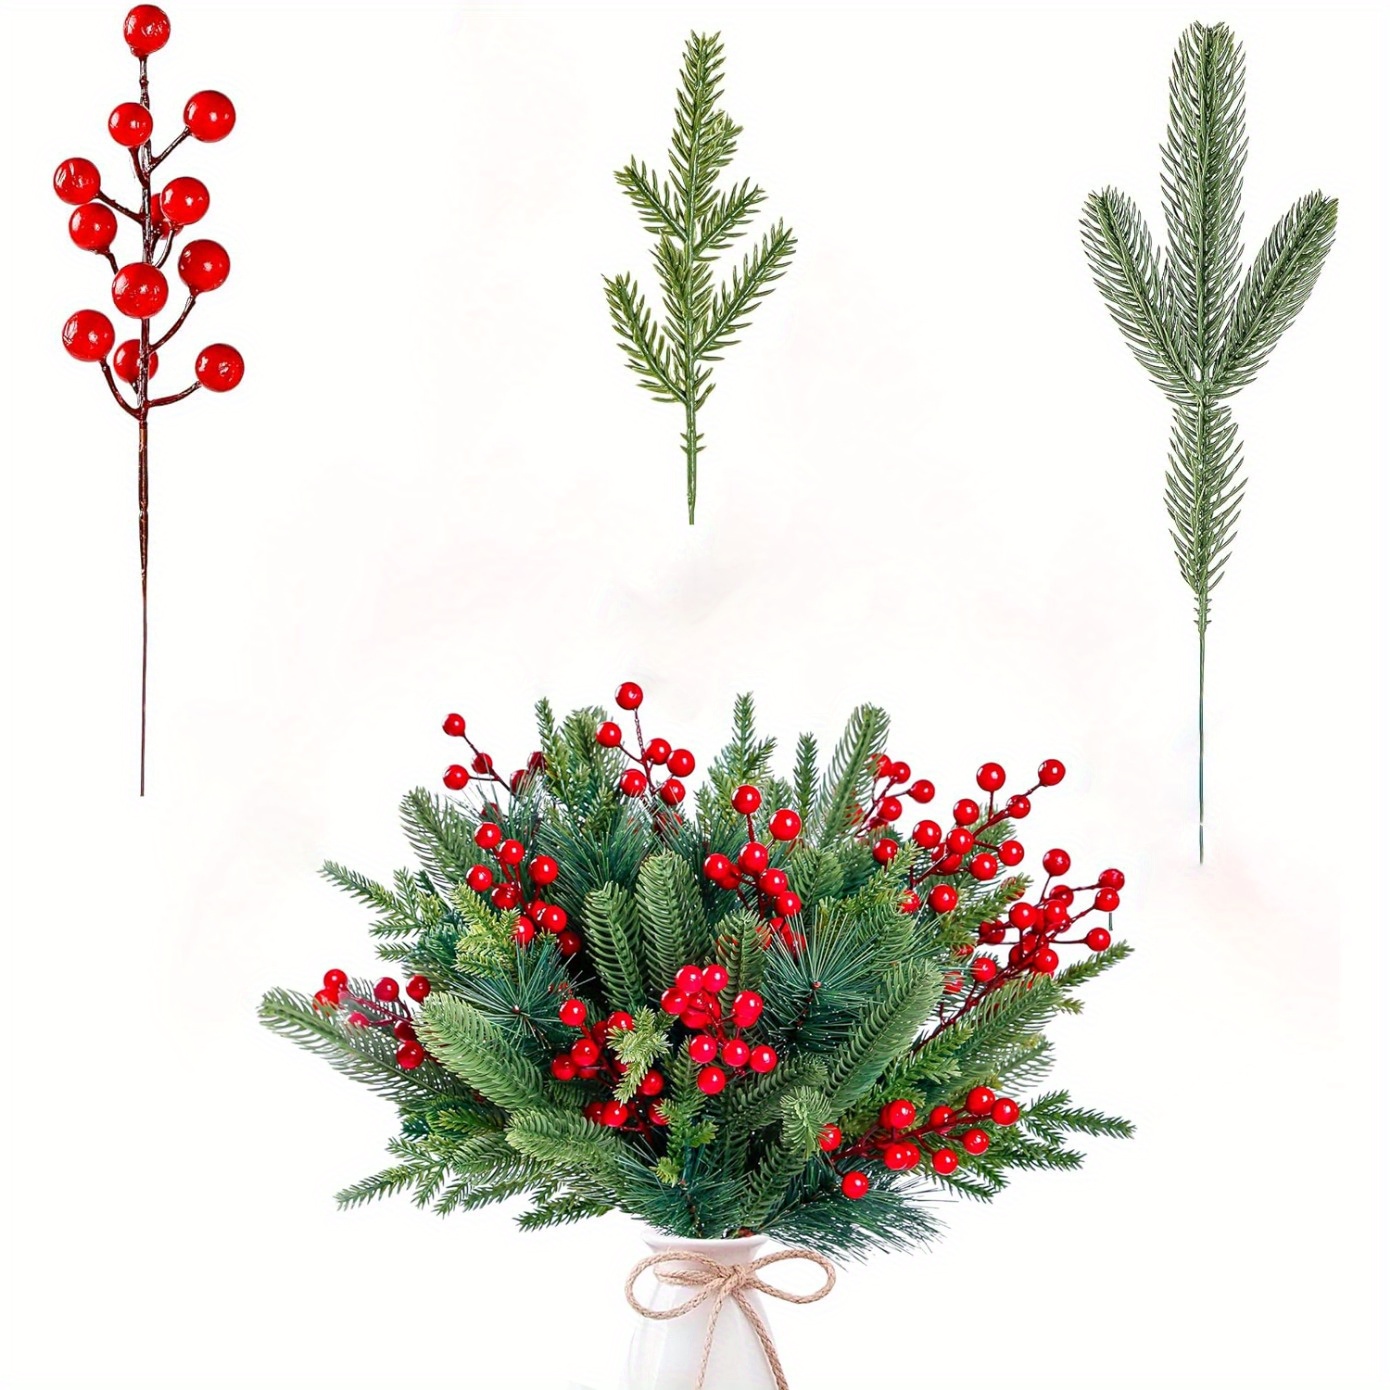 10PCS 9inch Christmas Floral Pine Cones, White Red Berry Stems, Artificial  Pine Branches with Snowflakes Flocked Floral Picks for Crafts DIY Holiday